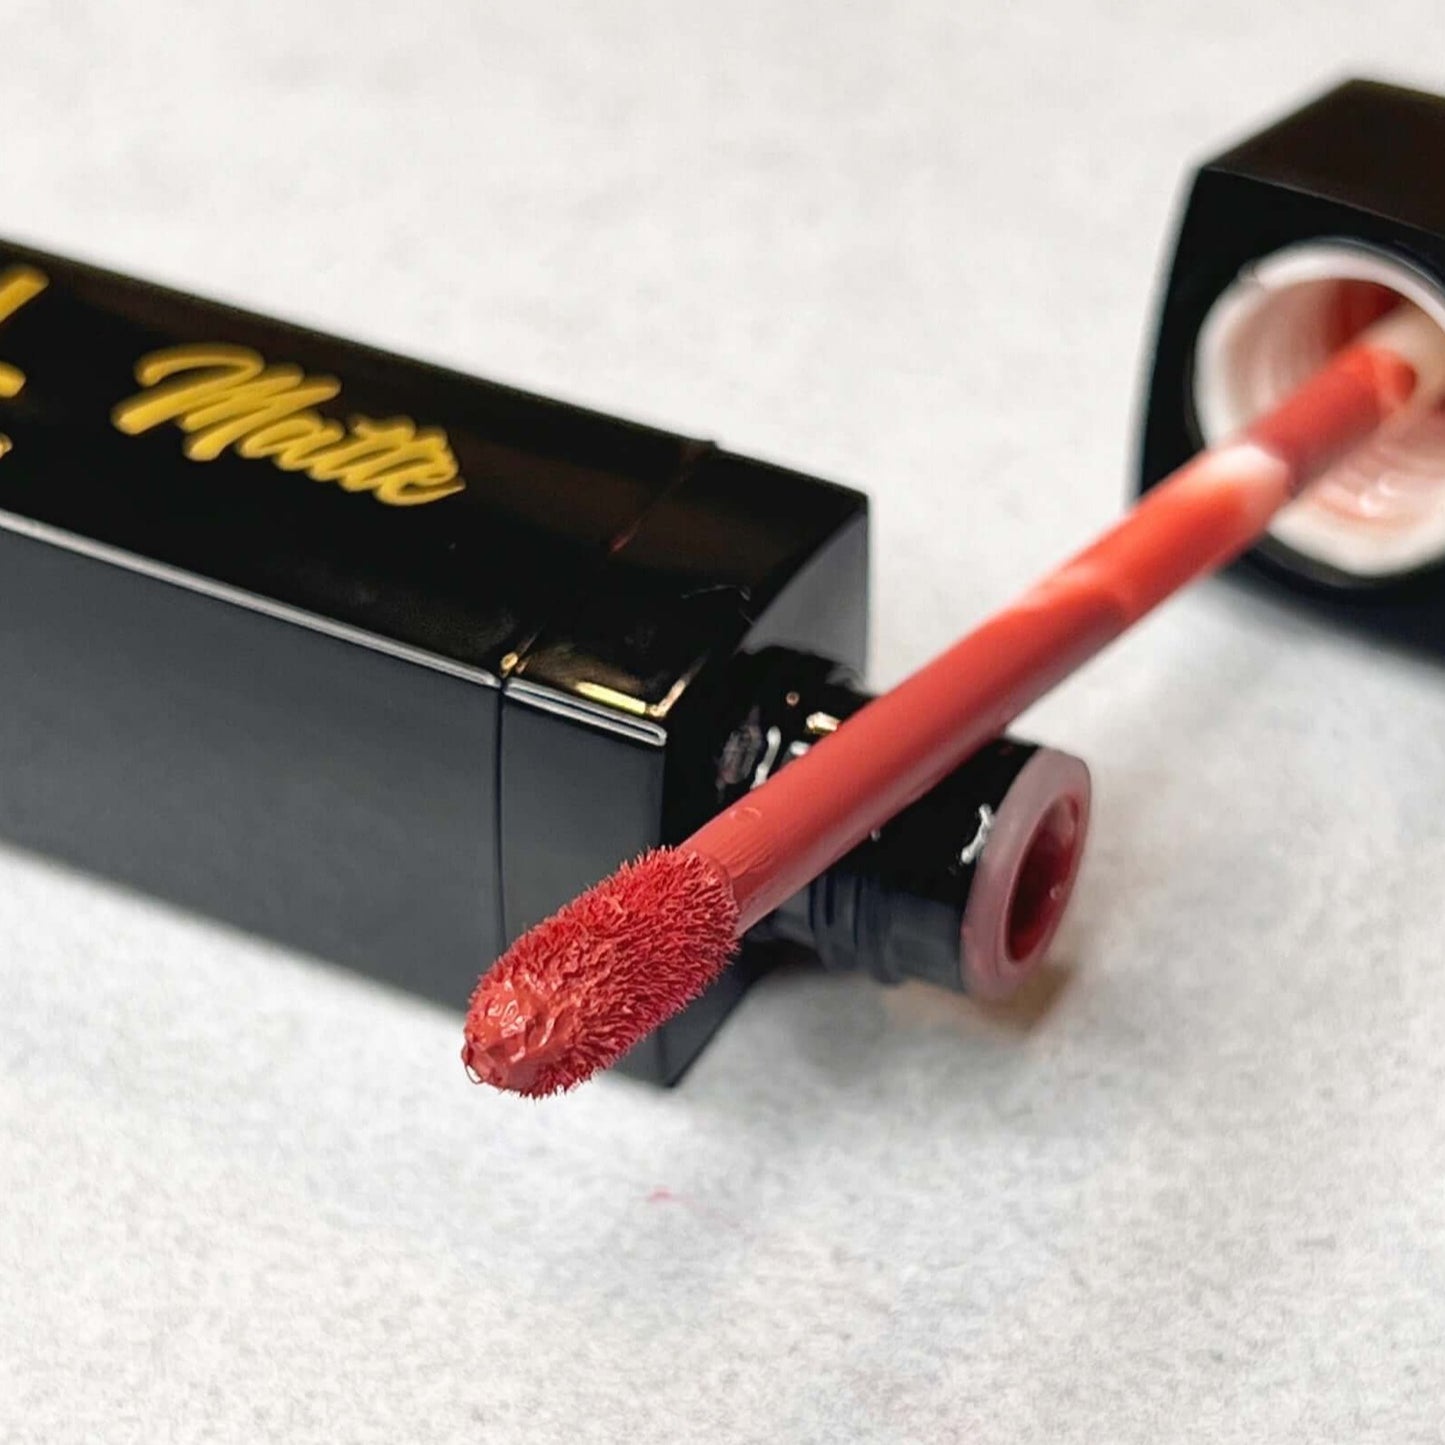 From the left you see a blurred picture of the right side of the bottle of Bold and Luscious Lipstick. The tip of the bottle is fluffy and you can see a muted rose color on the edge of the soft brush.